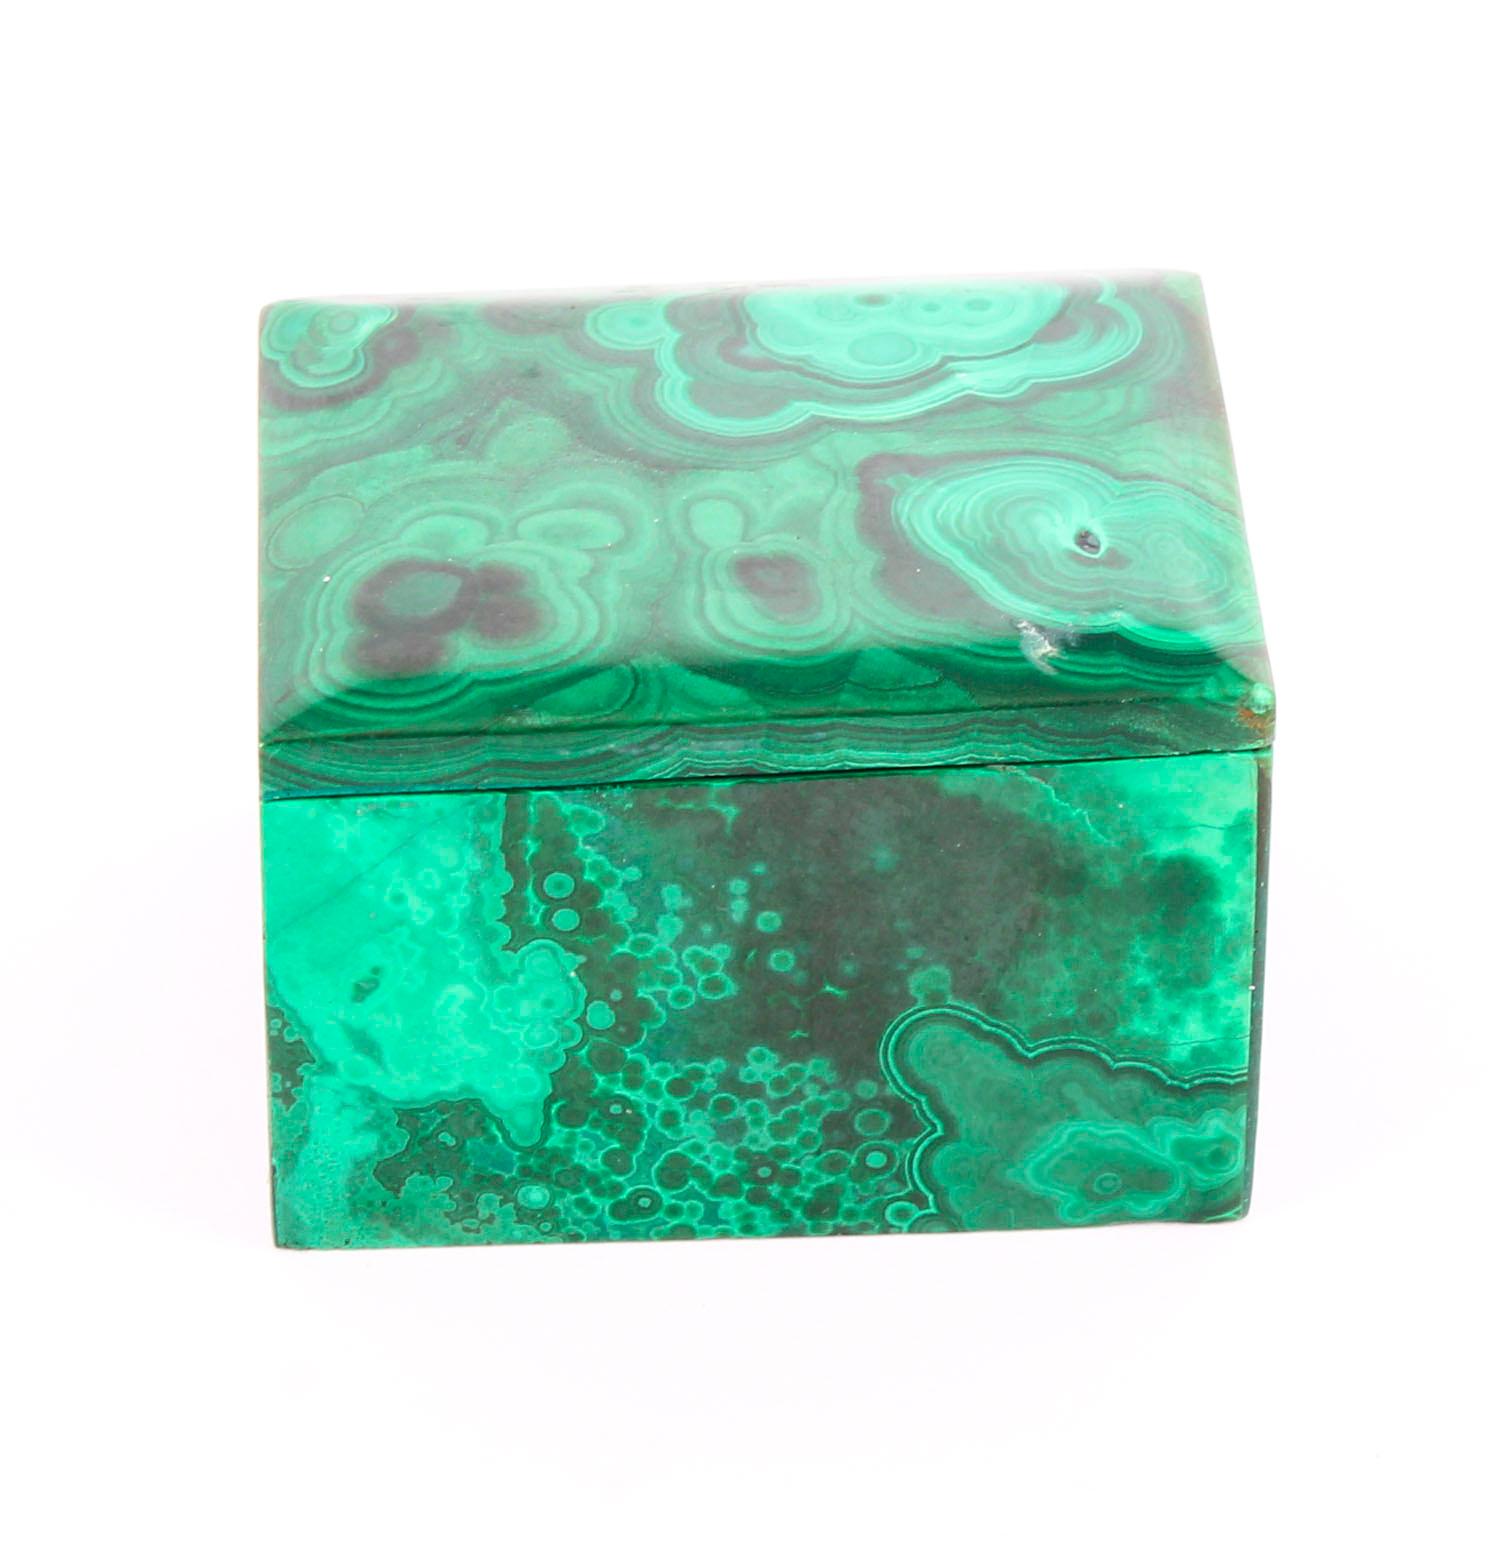 This is a superb quality antique solid malachite trinket/pillbox, circa 1880 in date.

The box is rectangular in shape with straight sides and corners and a lid with bevelled edges.

Add an elegant touch to your home with this lovely malachite